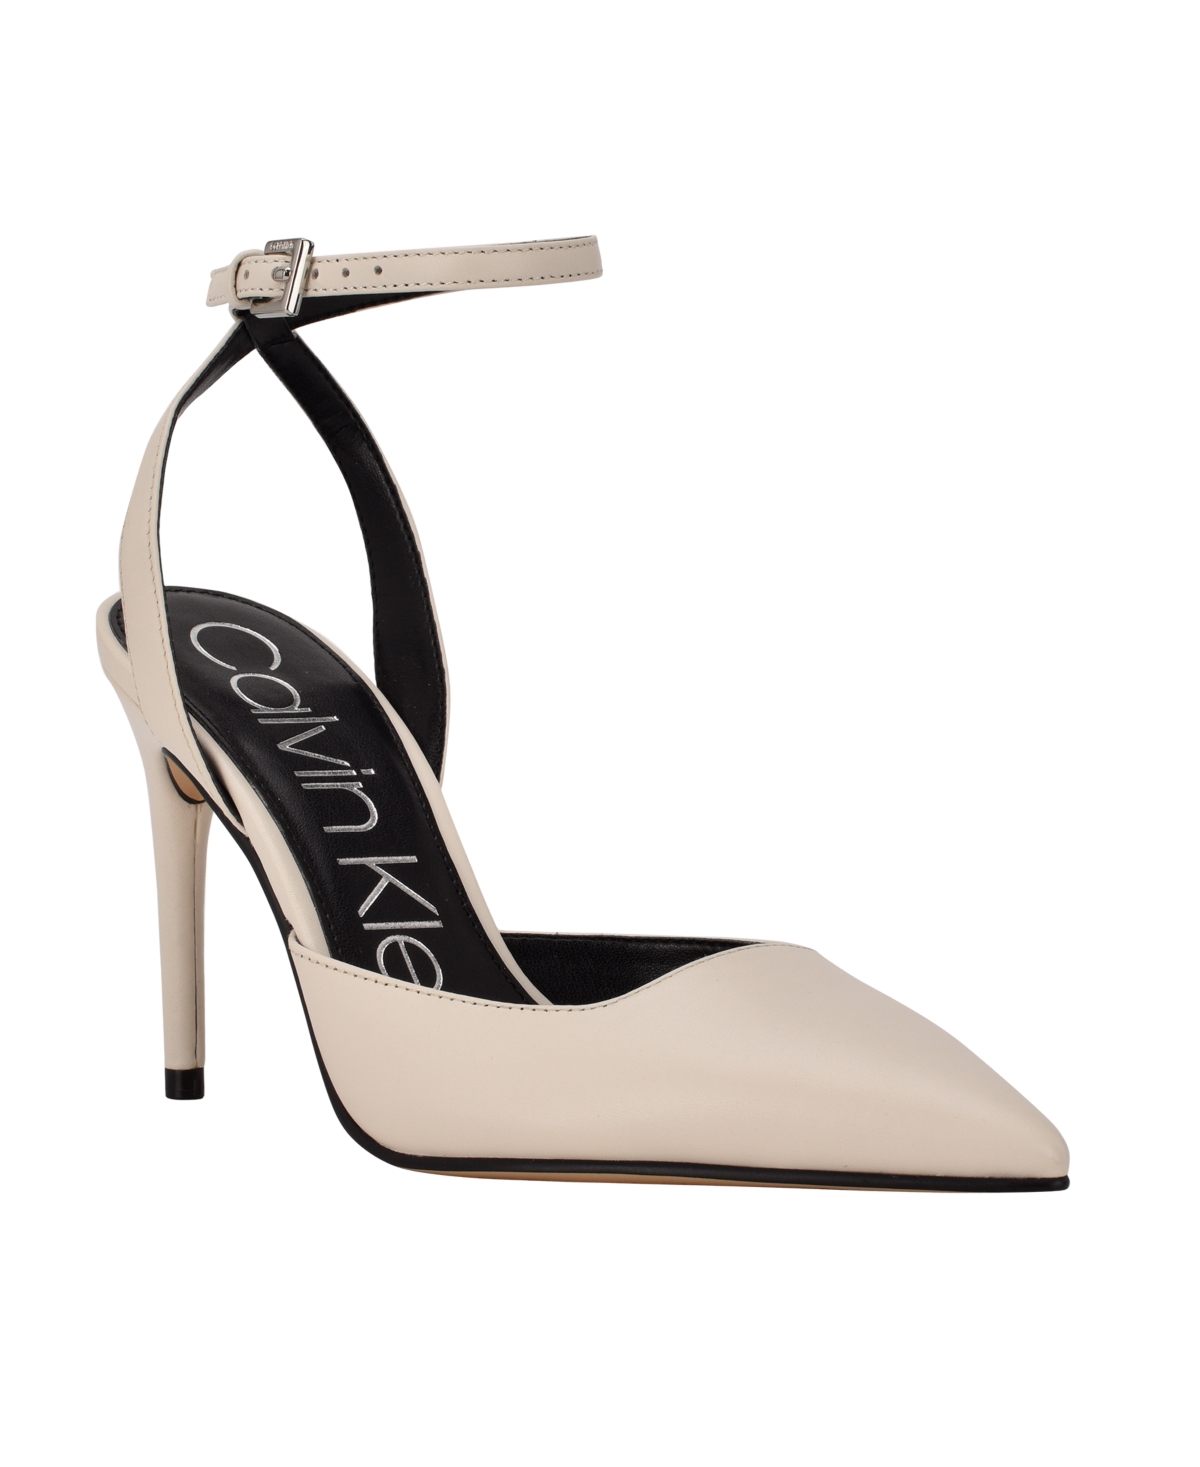 UPC 195972600829 product image for Calvin Klein Women's Dona Ankle Strap Pumps Women's Shoes | upcitemdb.com